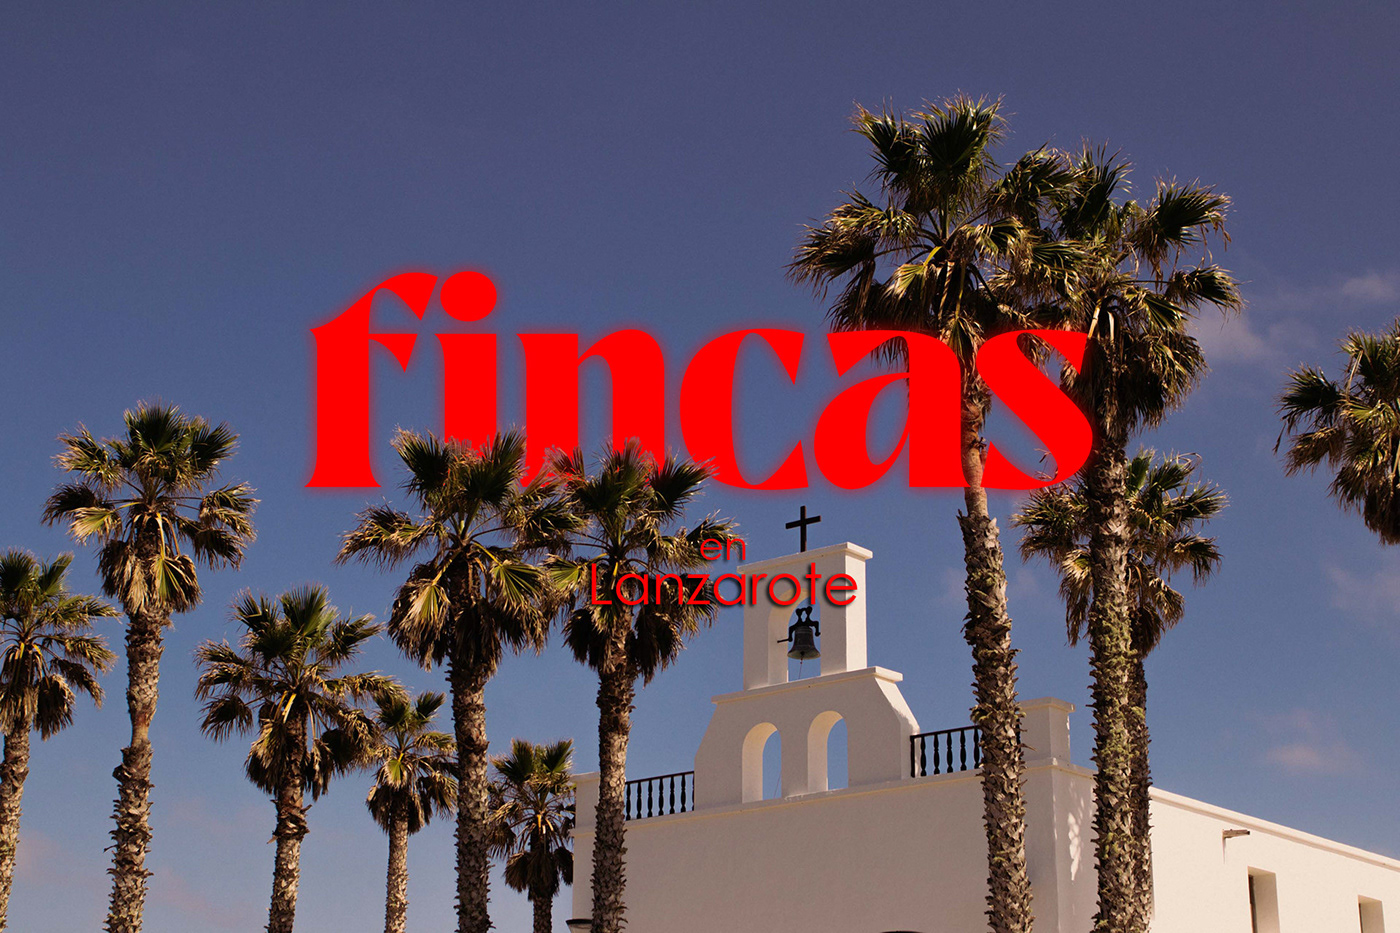 Fincas en Lanzarote is a collection of the white houses there are in the island